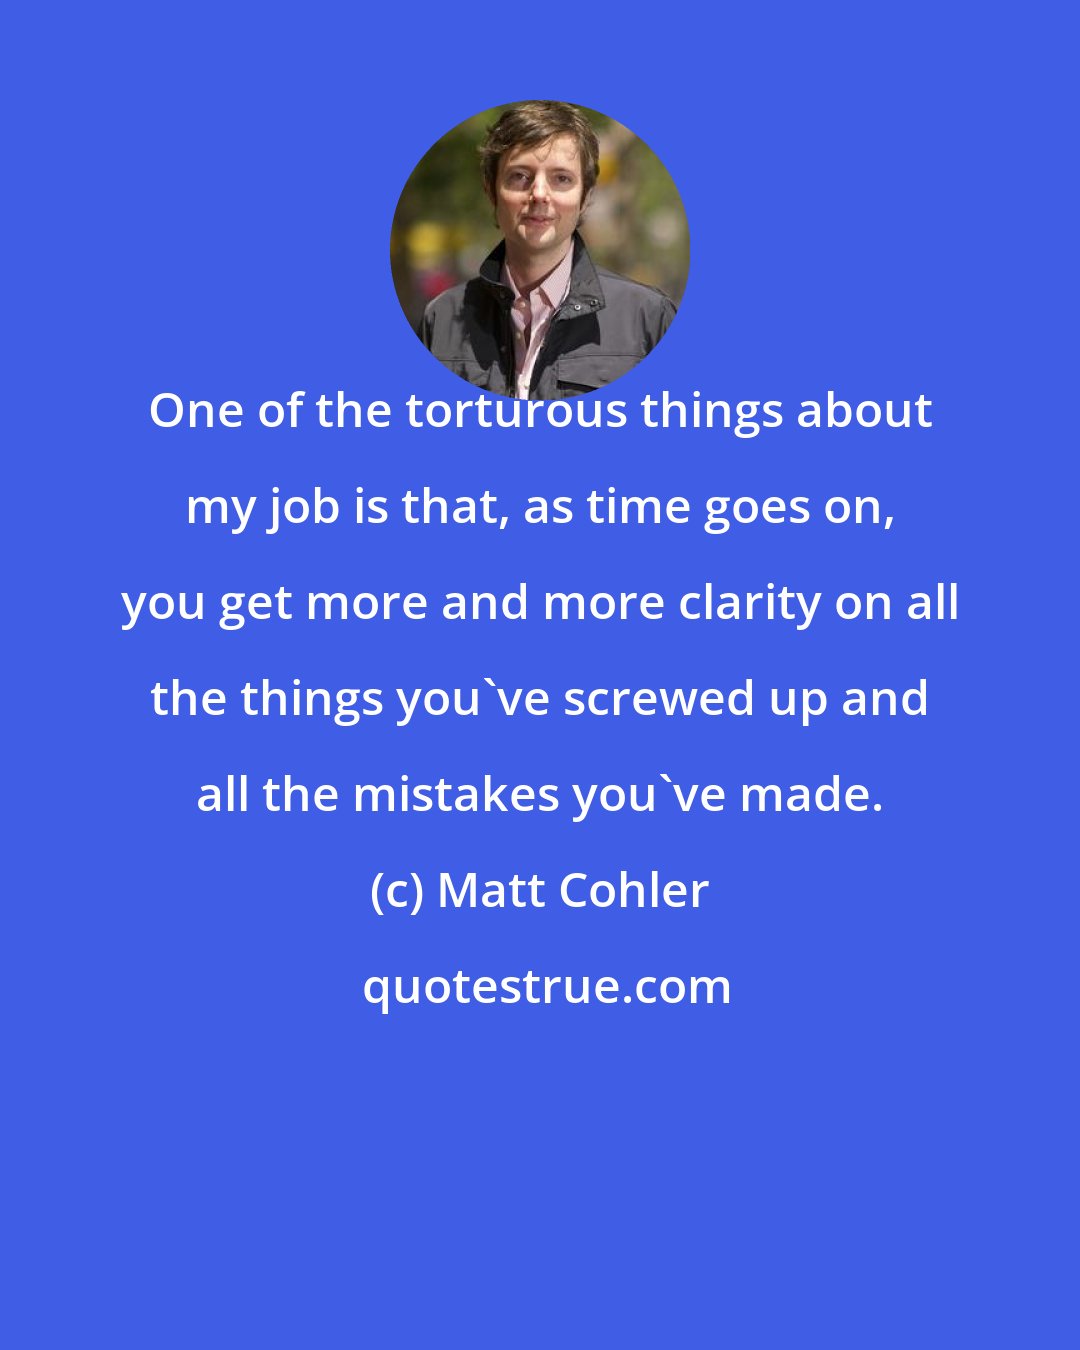 Matt Cohler: One of the torturous things about my job is that, as time goes on, you get more and more clarity on all the things you've screwed up and all the mistakes you've made.